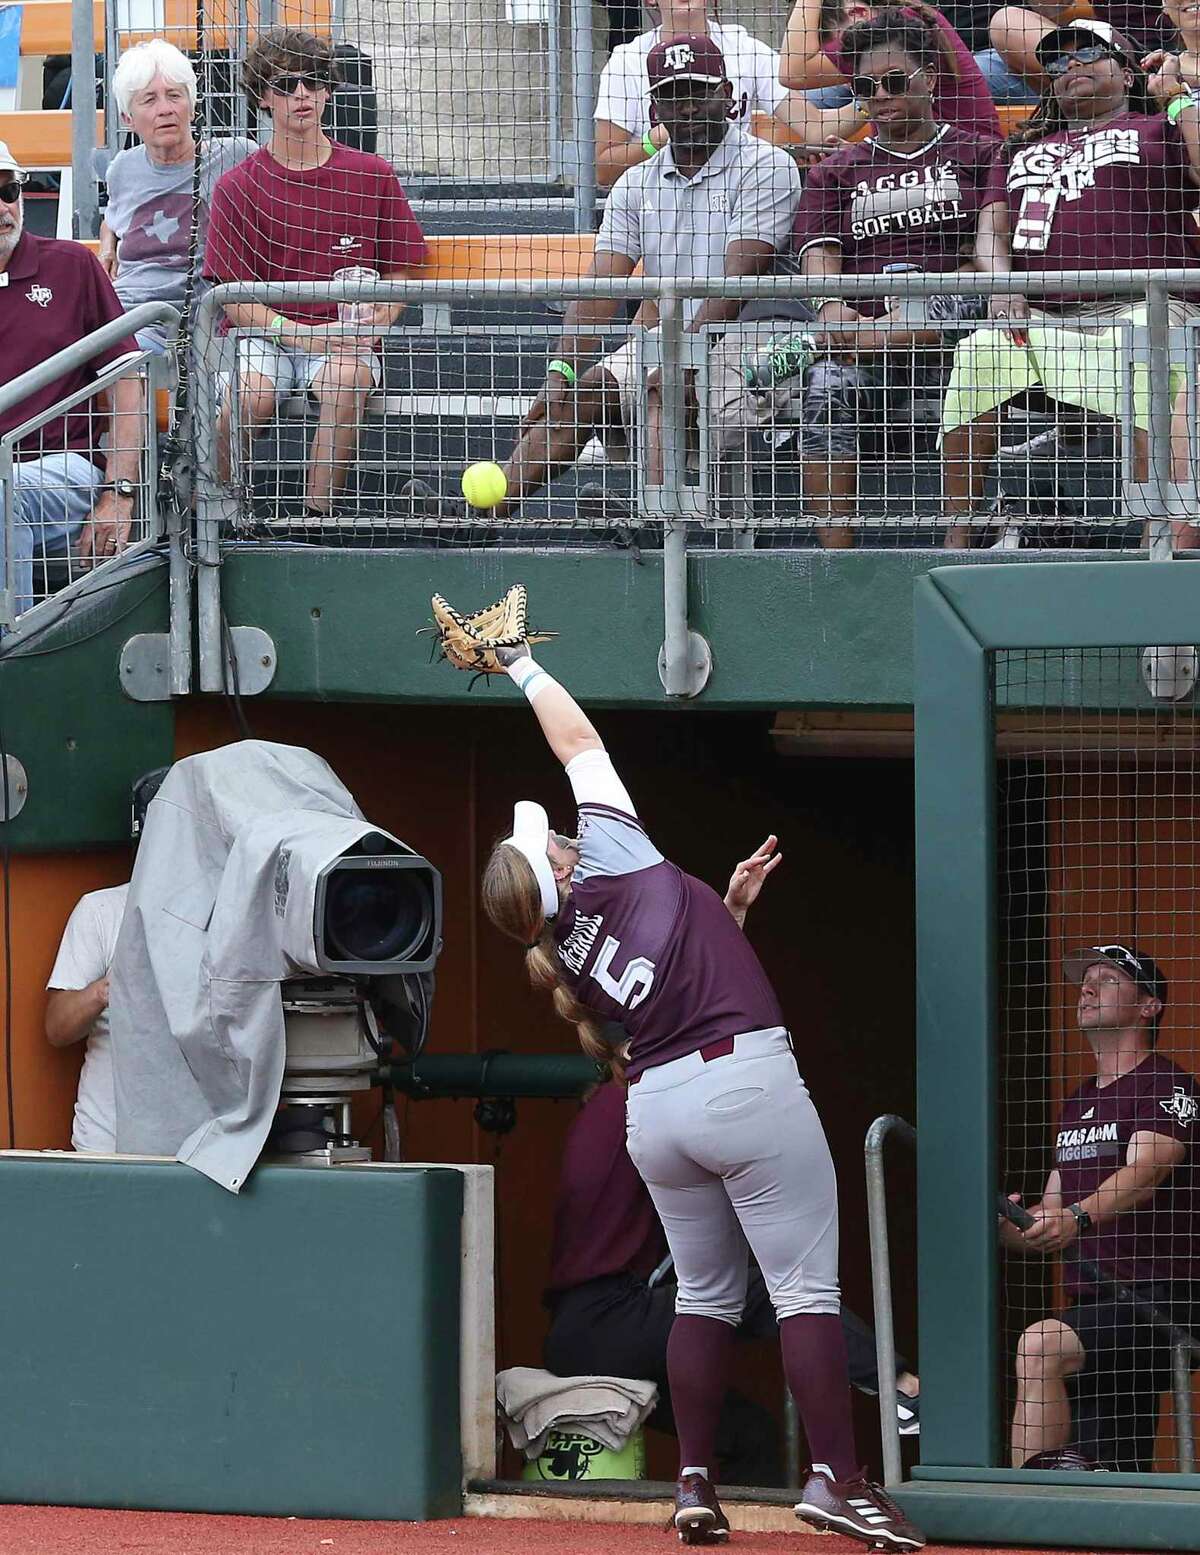 Aggies first baseman Payton McBride stretches to catch a foul ball above the dugout as Houston beats Texas A&M 3-1 in the NCAA regional tournament at MCCombs Field in Austin on May 17, 2019.